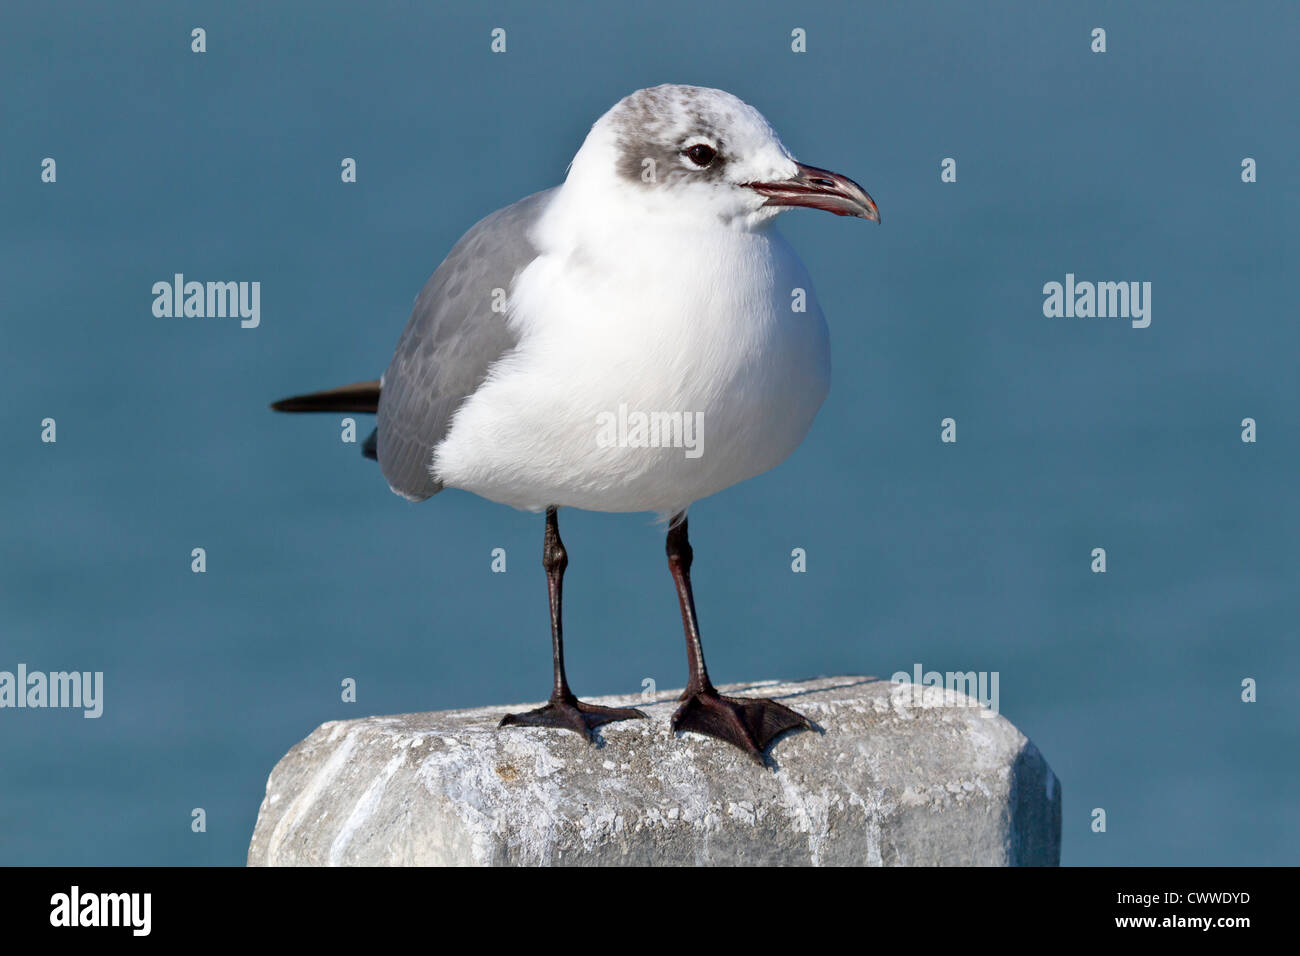 Sea gull standing on concrete piling at Fort De Soto county park in Tierra Verde, Florida Stock Photo